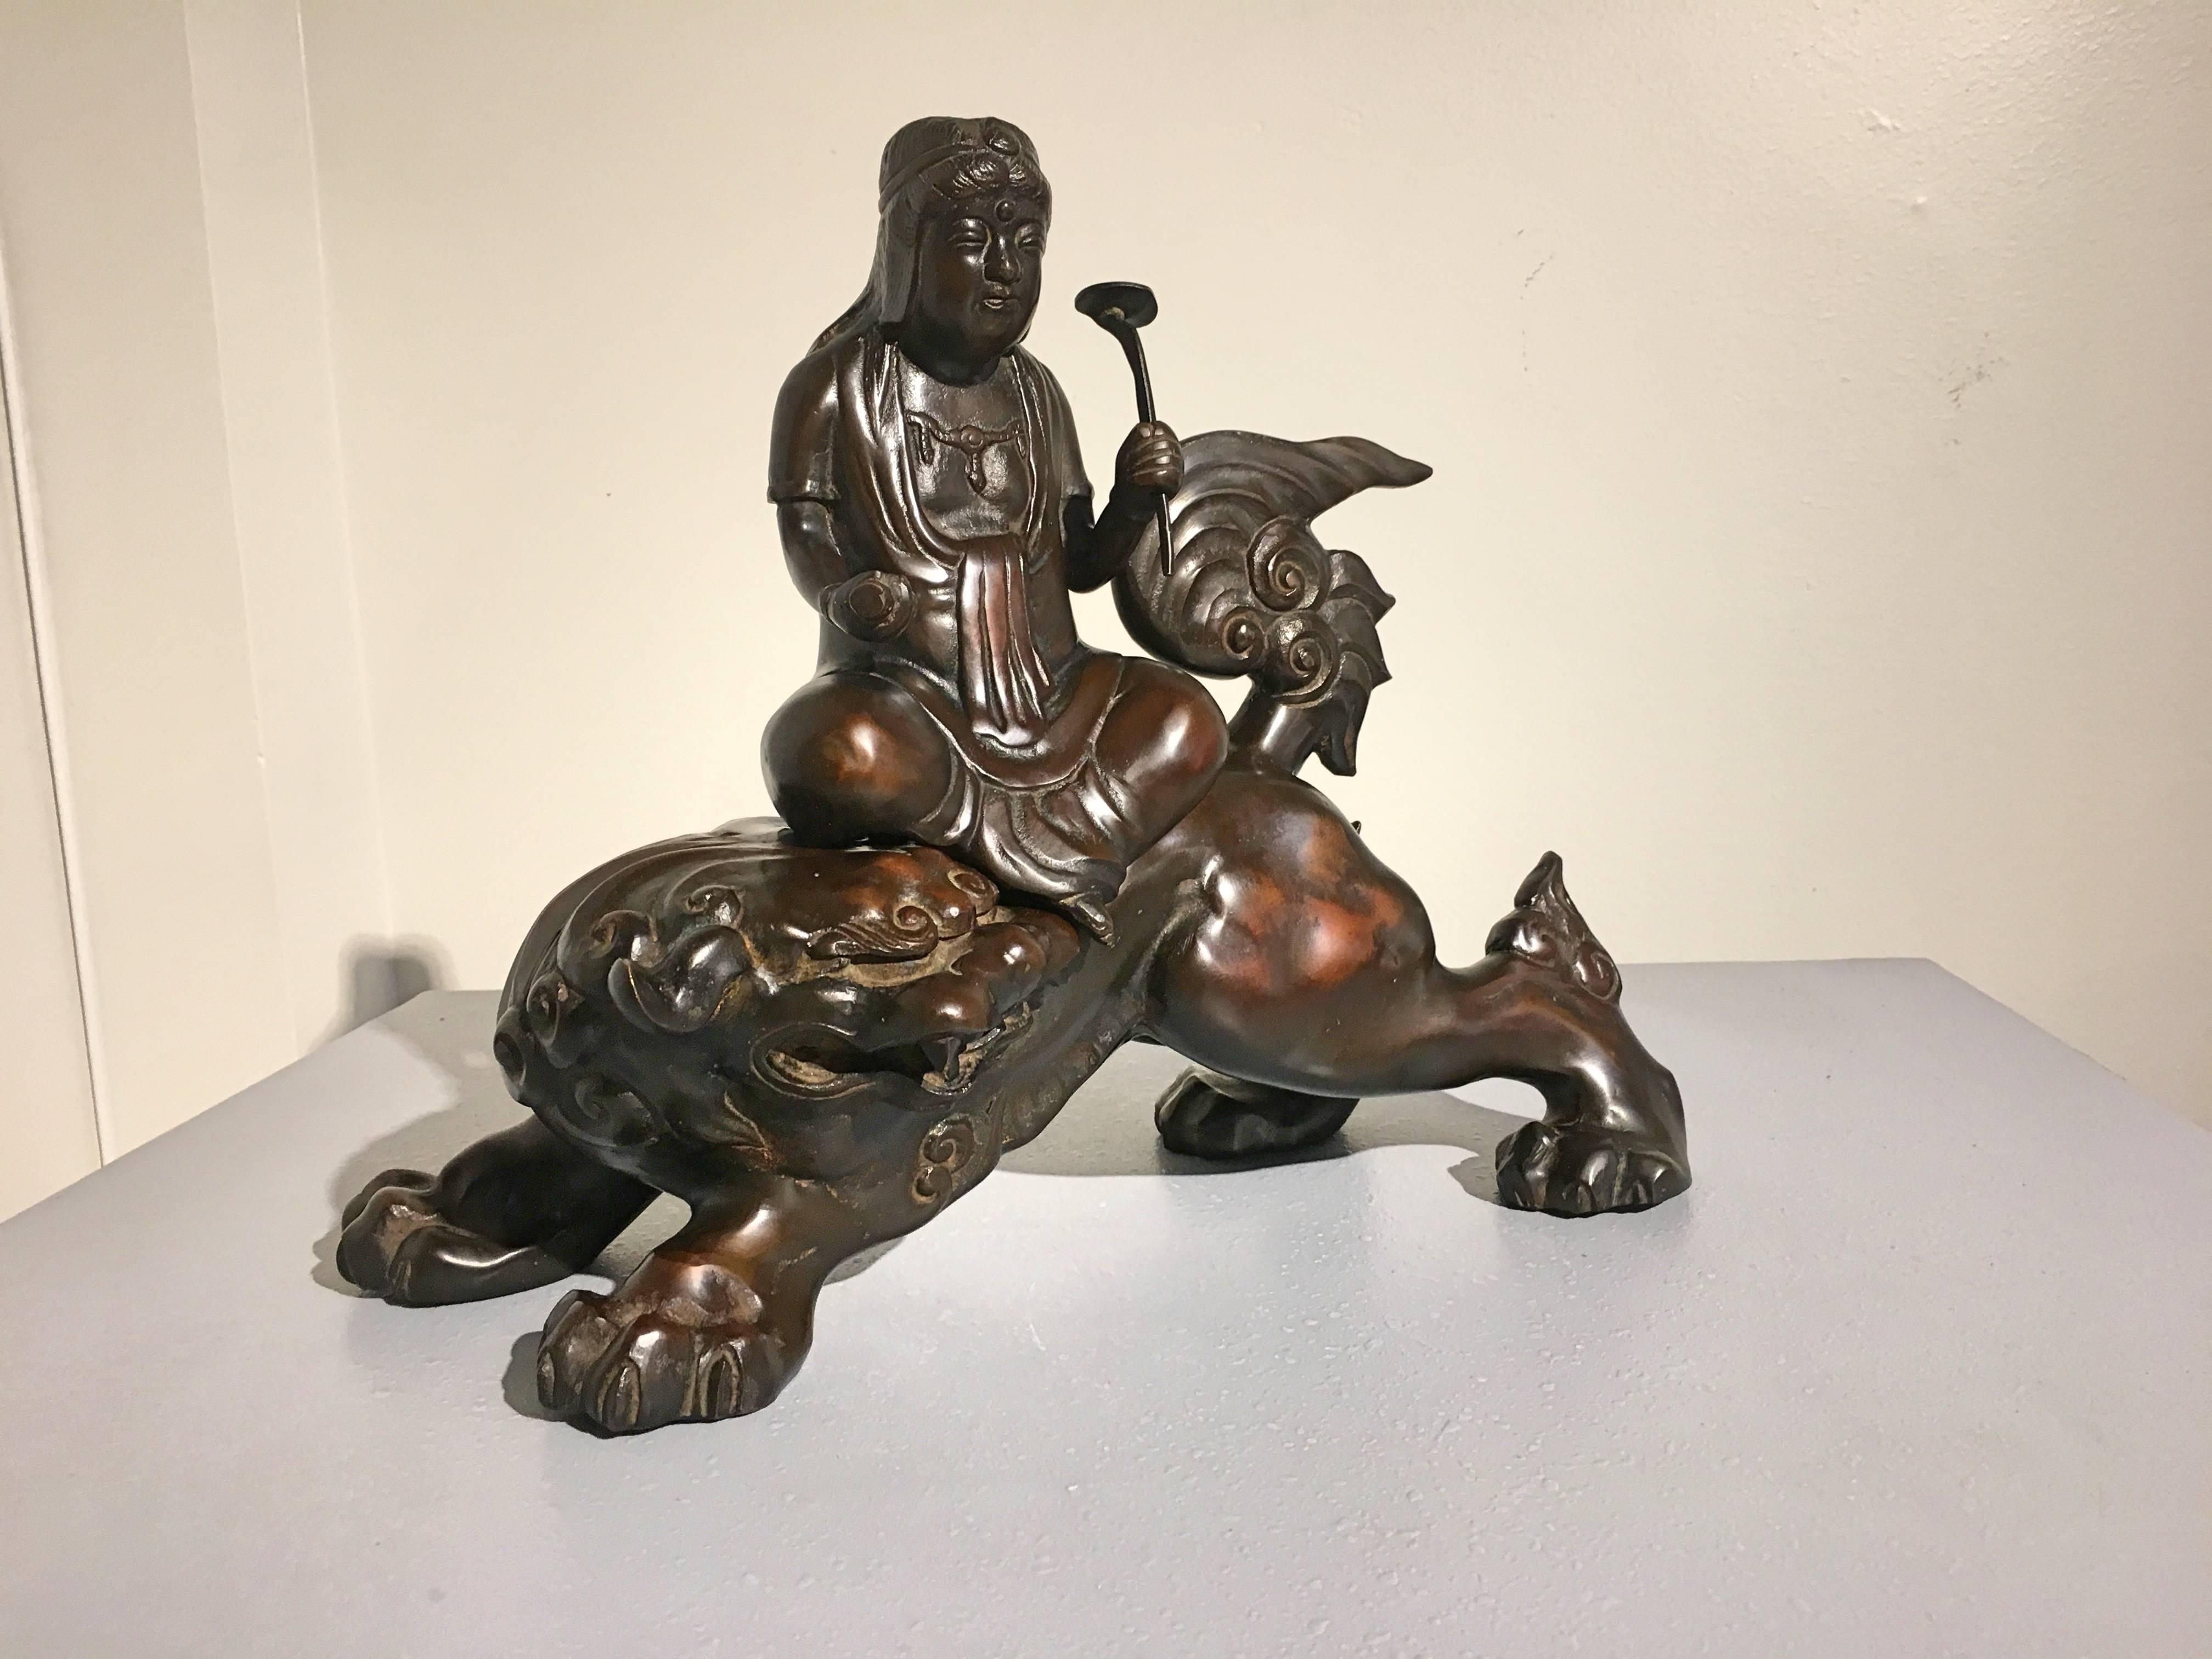 A powerfully sculpted Japanese Taisho Period cast bronze figure of the Buddhist deity Manjushri, known as Monju Bosatsu in Japan, riding atop a ferocious lion.
This Art Deco period sculpture portrays the bodhisattva of Wisdom and Law seated upon a